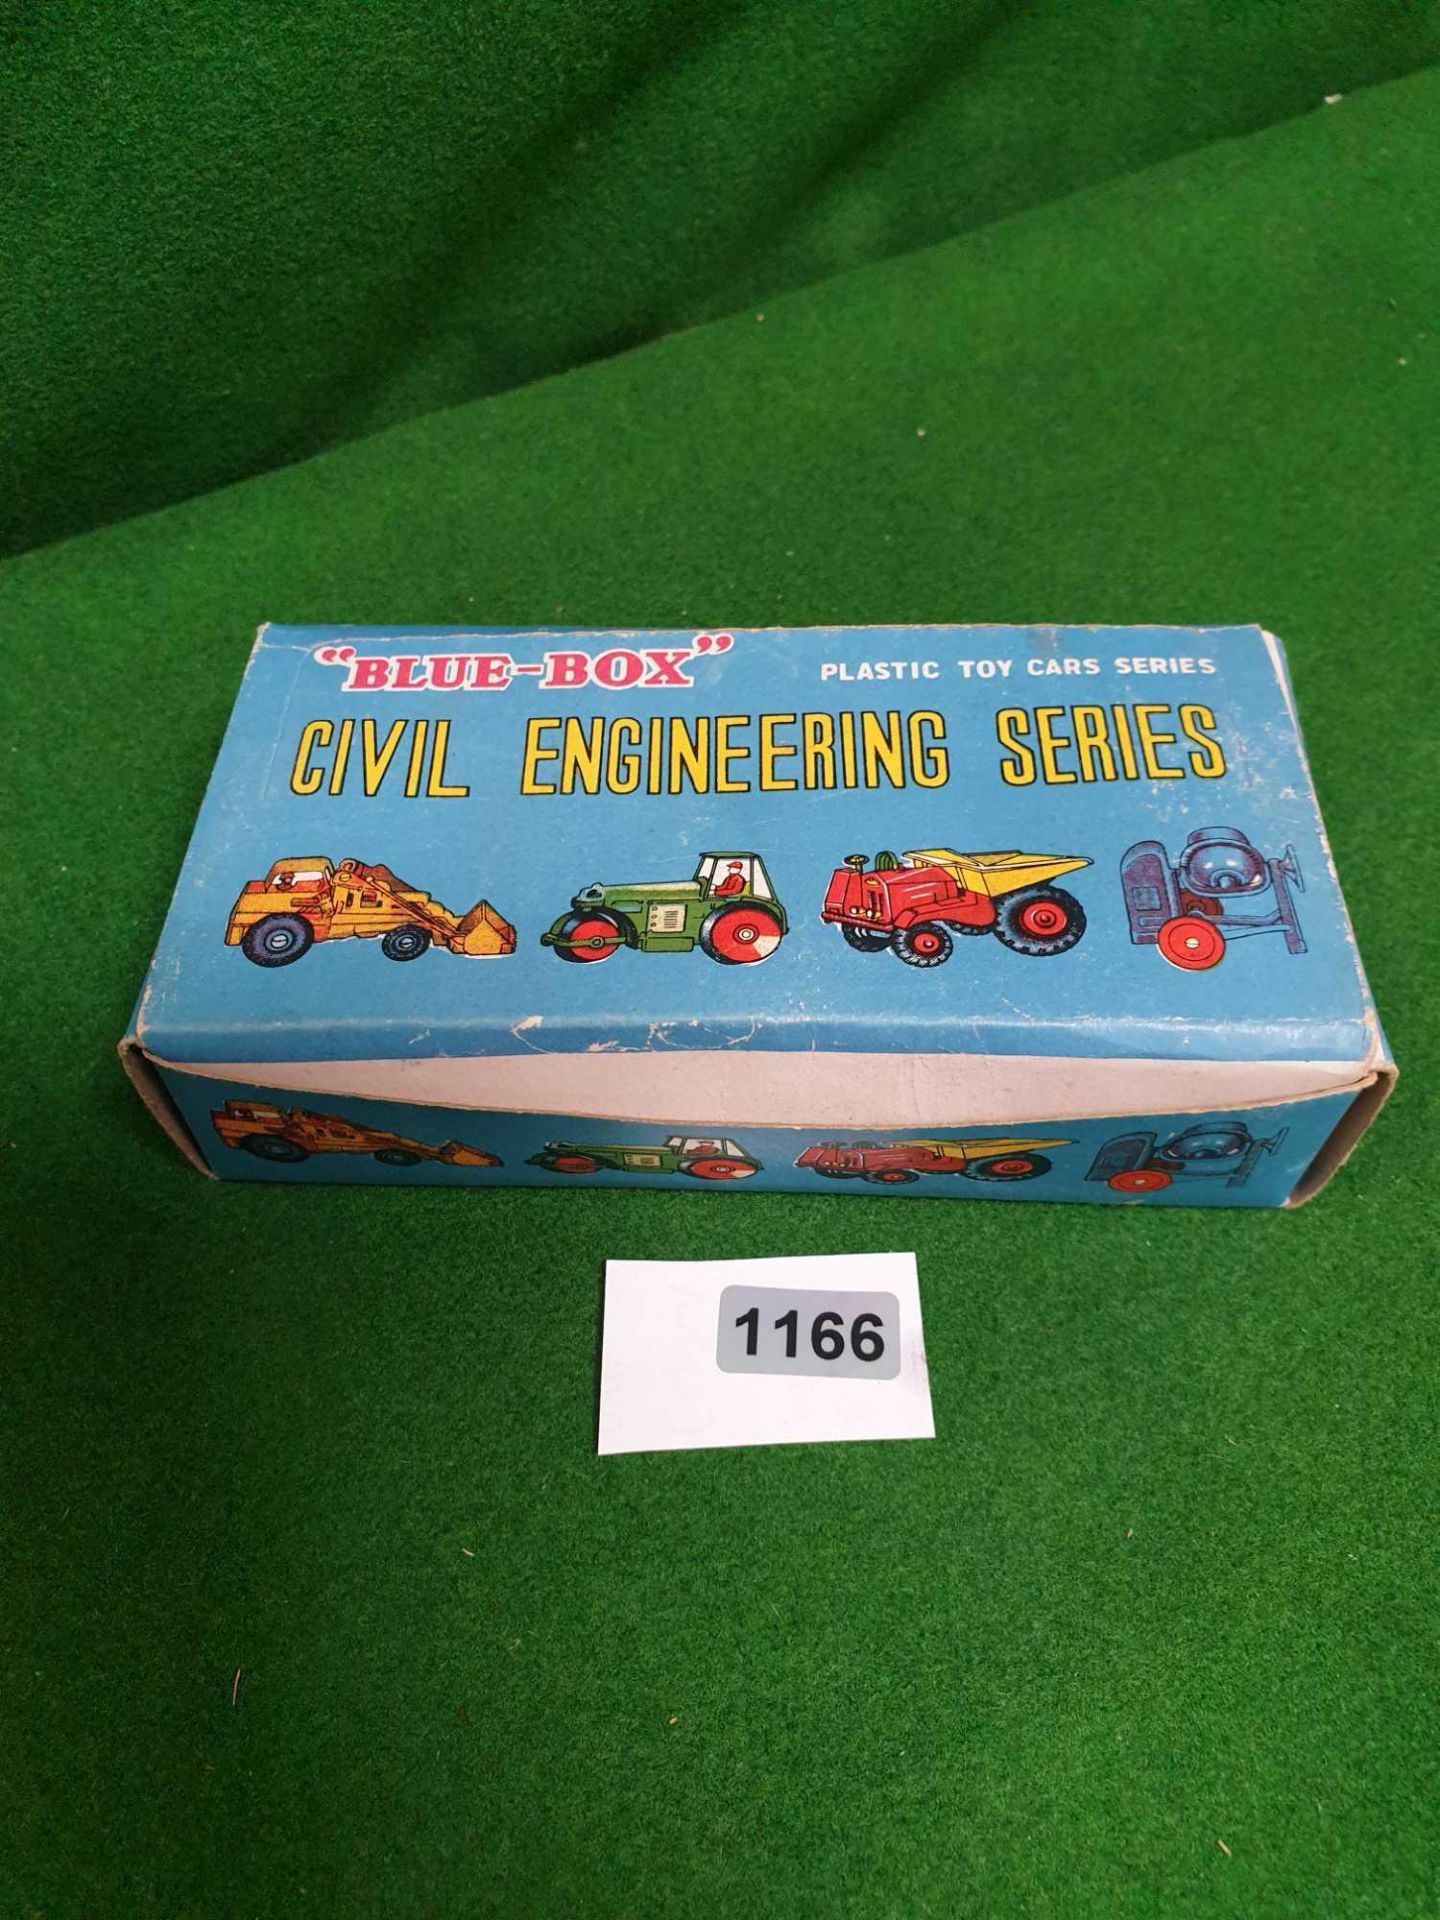 Blue Box Plastic Toy Car Series Civil Engineering Series No. # 7404 With 4 Vehicles In Box Rare